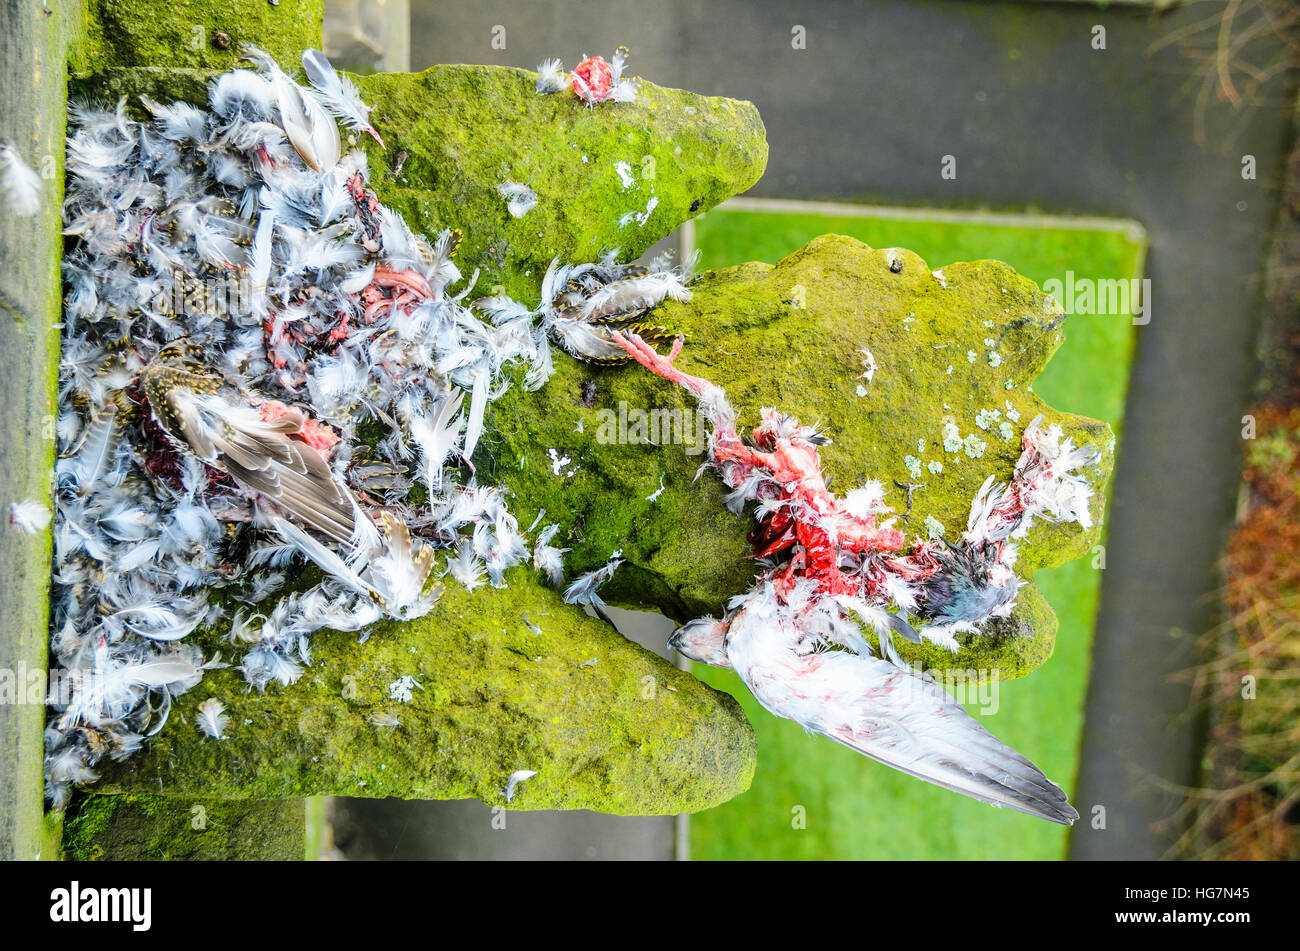 Remains of prey left by (presumed) peregrine falcon on a gargoyle on a church spire in northwest England Stock Photo